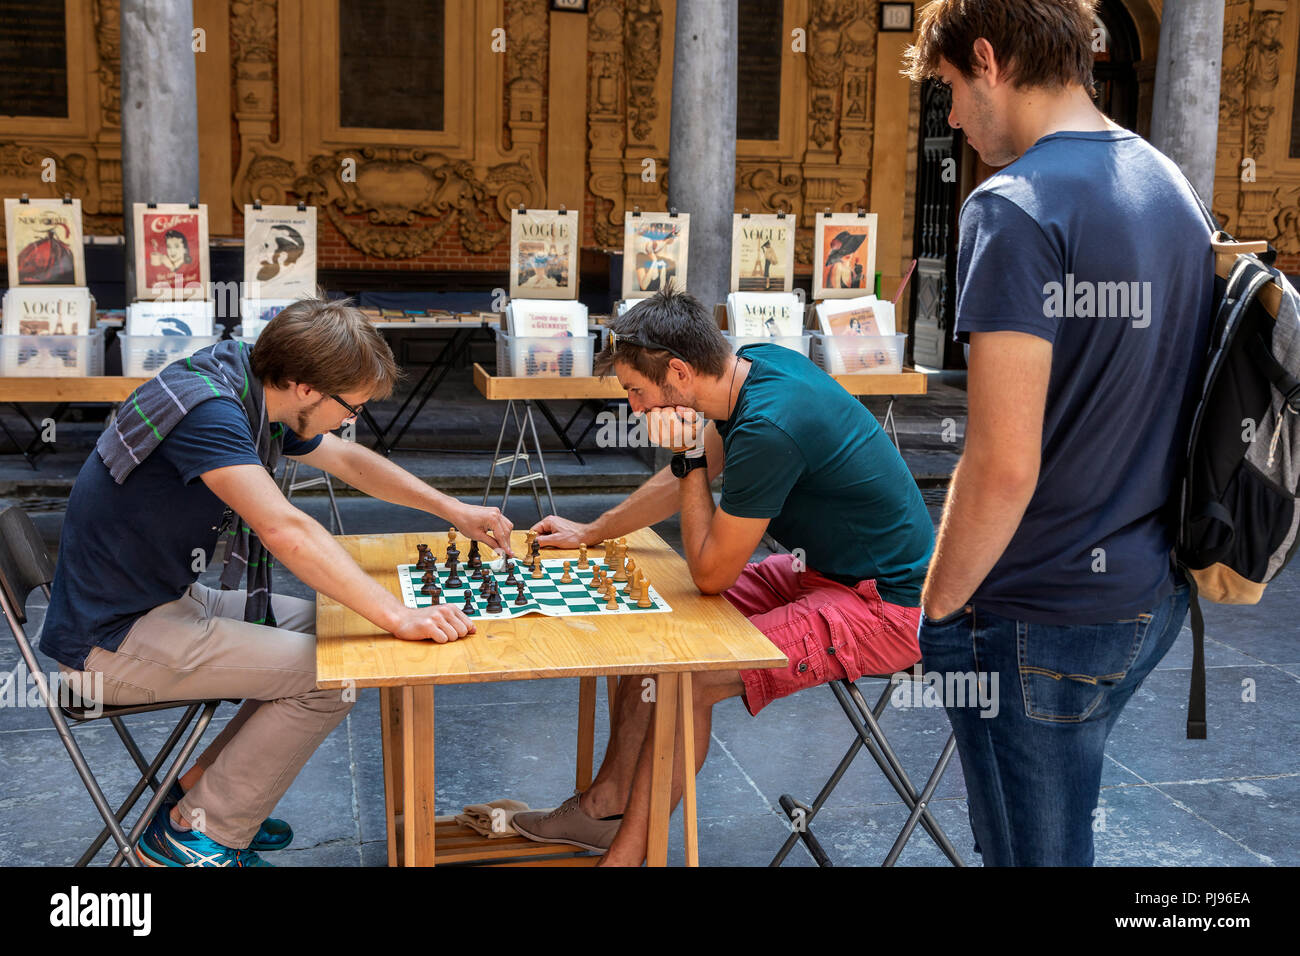 Two men playing chess in the old book, music and antiques market, held in Vielle Bourse de Lille, Place du General de Gaulle, Lille, France Stock Photo